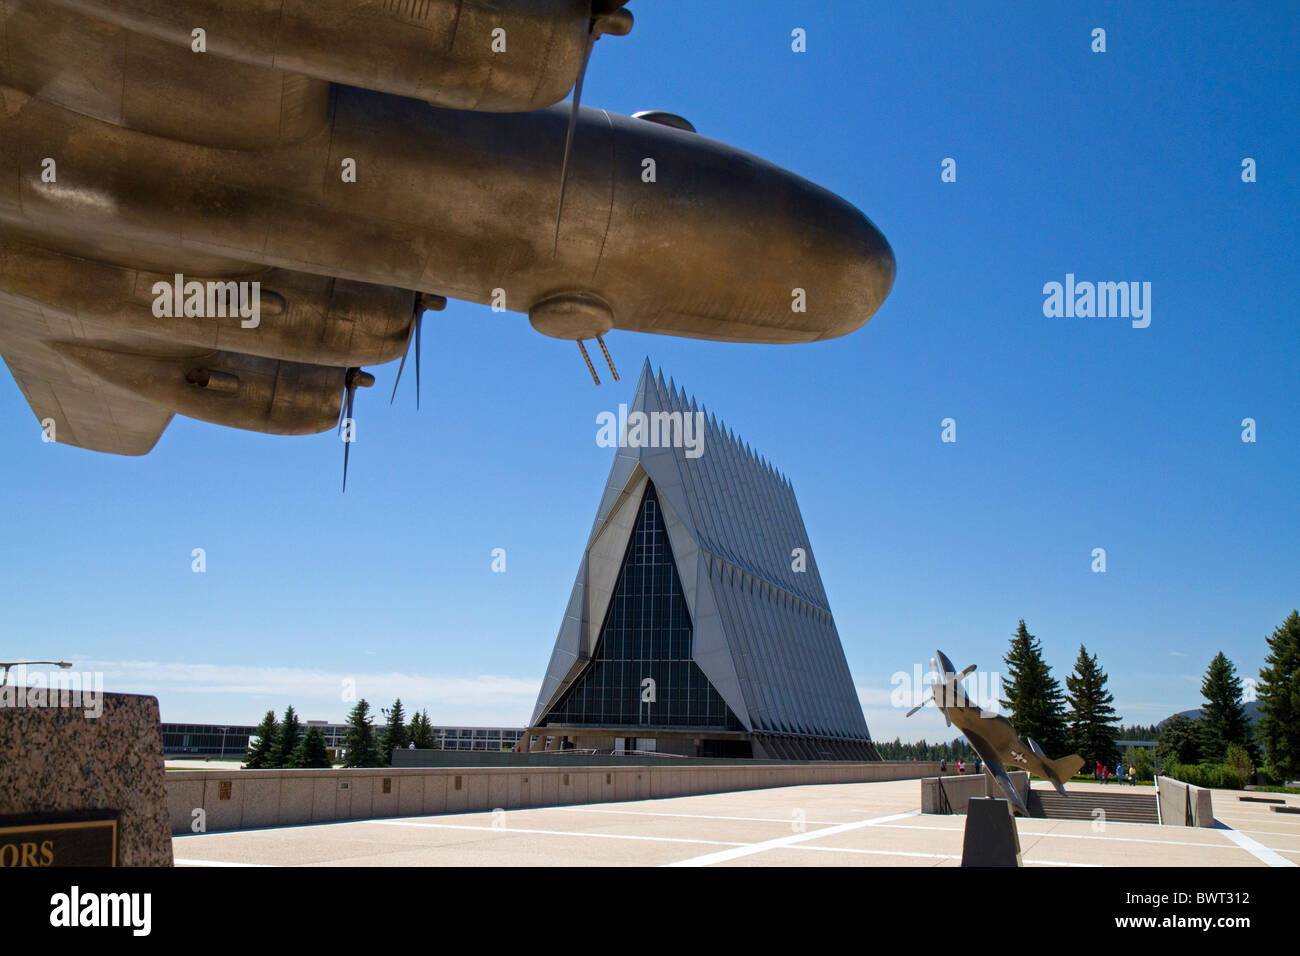 Bronze sculpture of vintage WW11 aircraft in front of the Cadet Chapel at the Air Force Academy, Colorado Springs, Colorado, USA Stock Photo